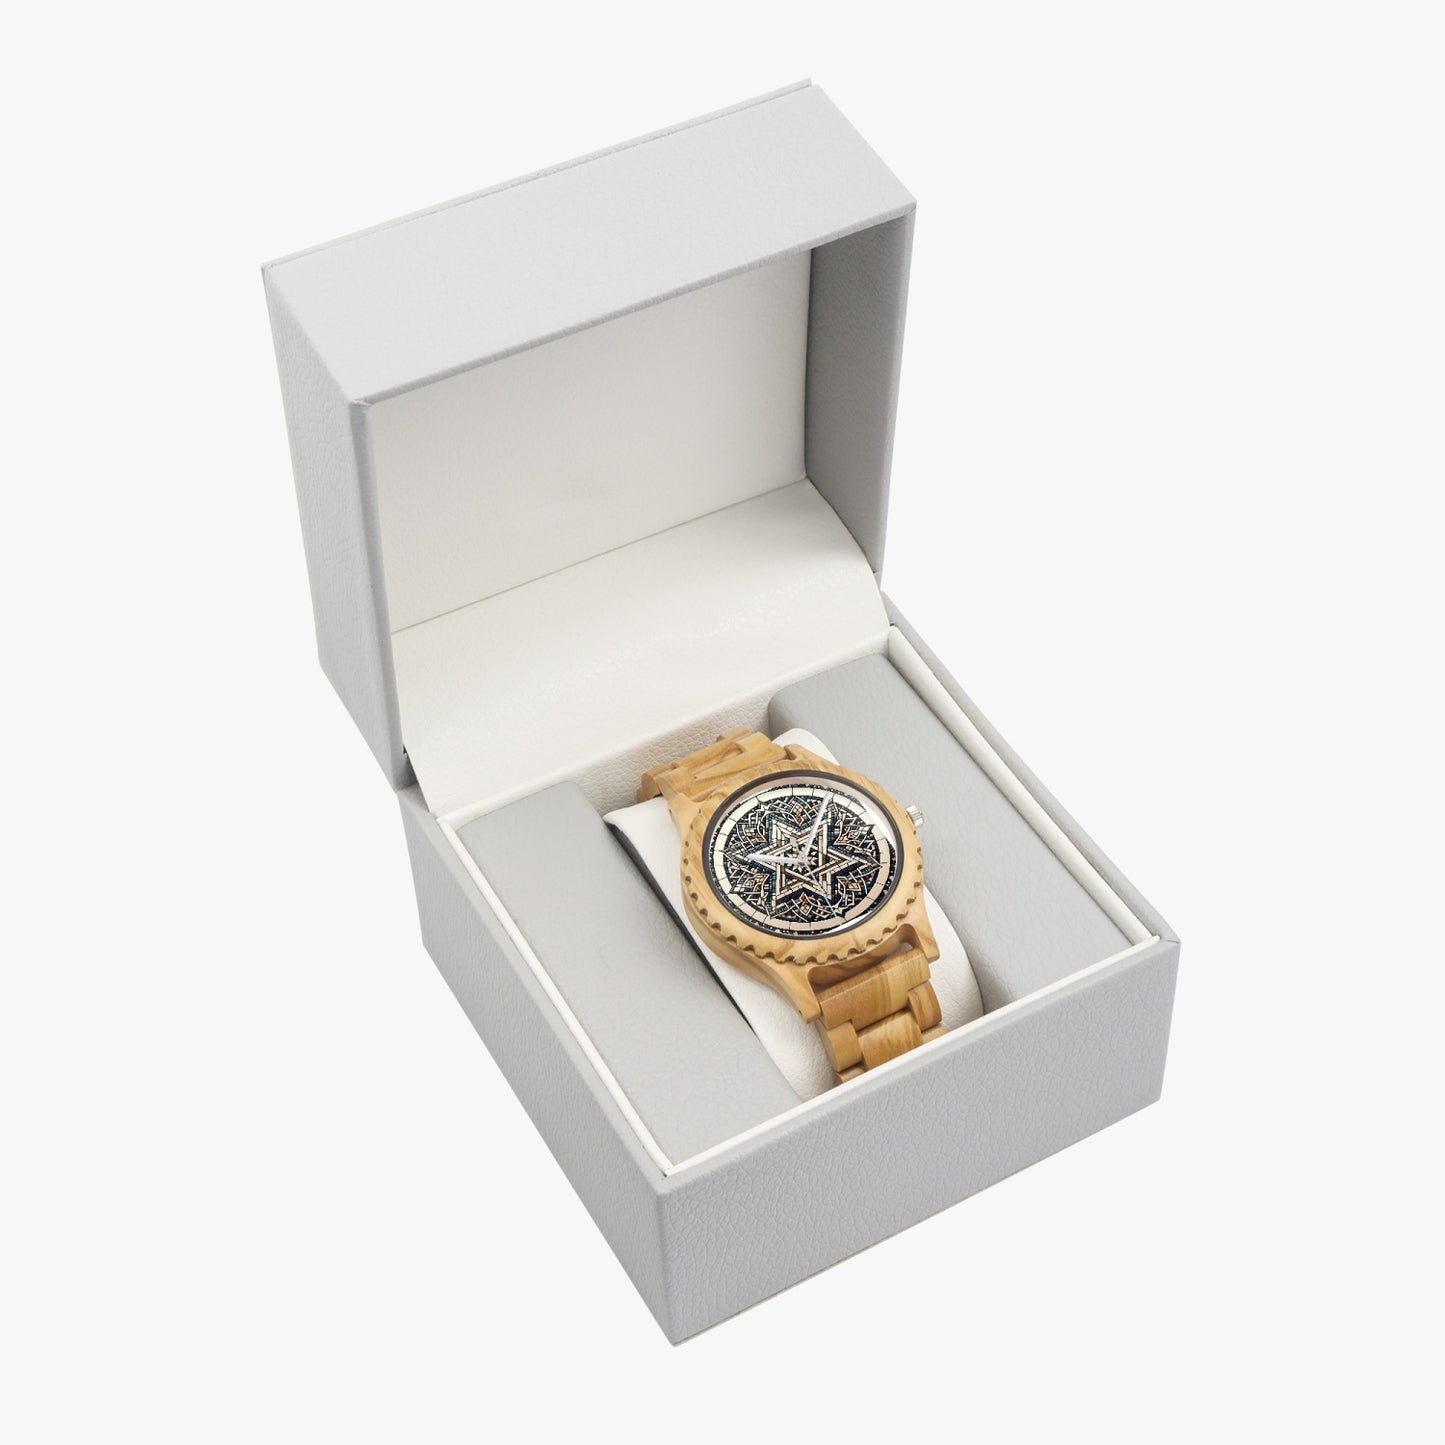 Intricate Star of David Italian Olive Wooden Watch in box